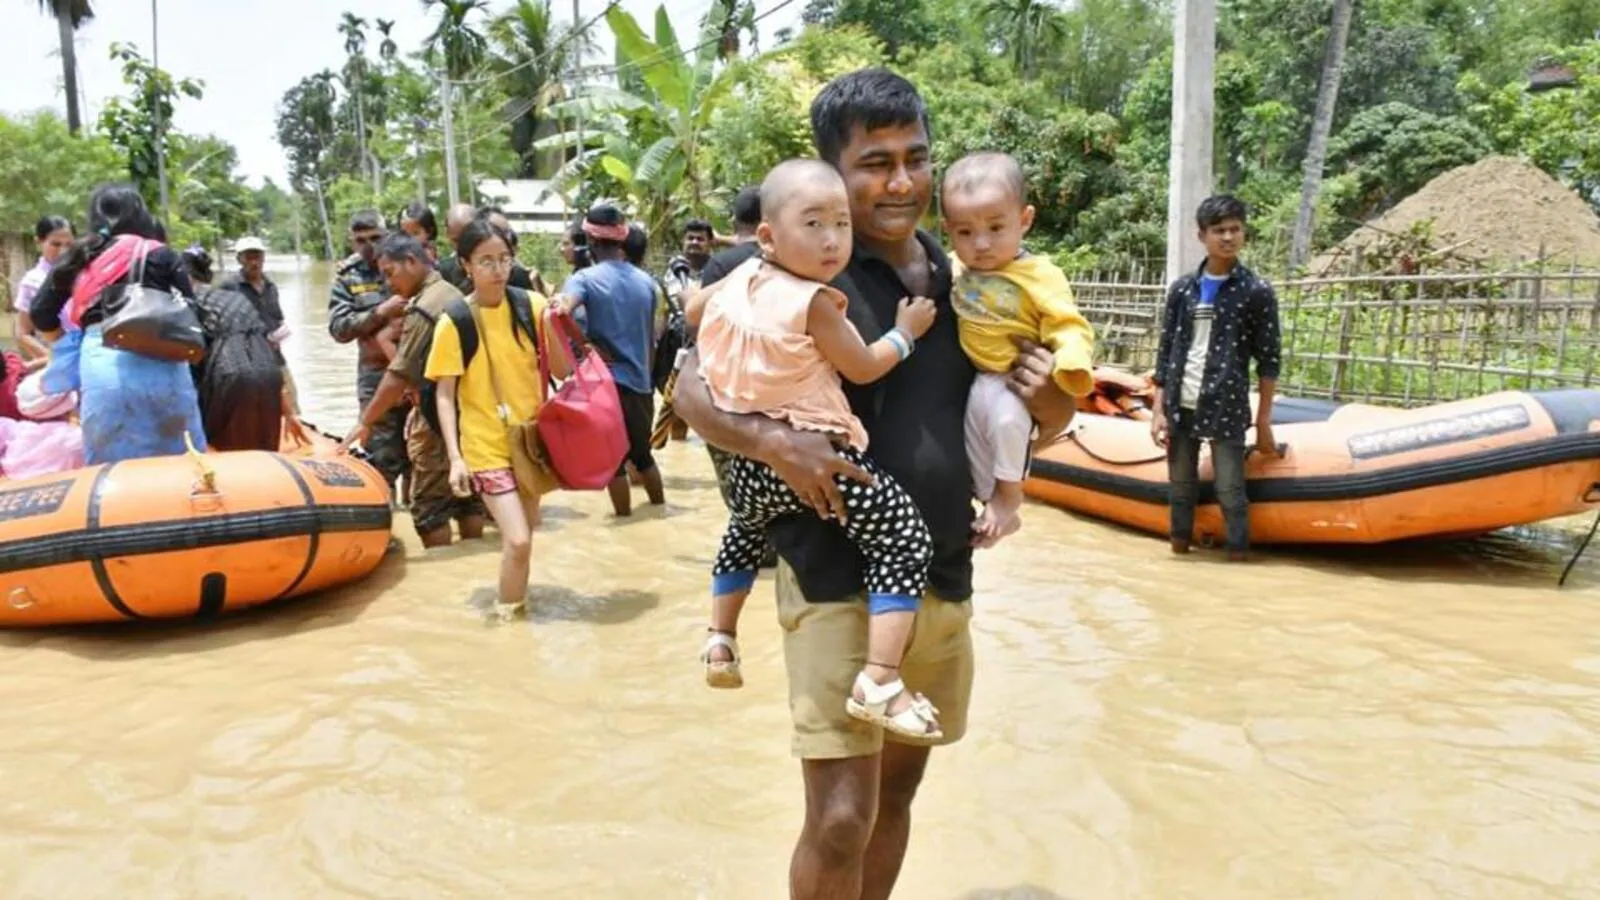 Over 660,000 affected by floods in 27 districts of Assam: Govt